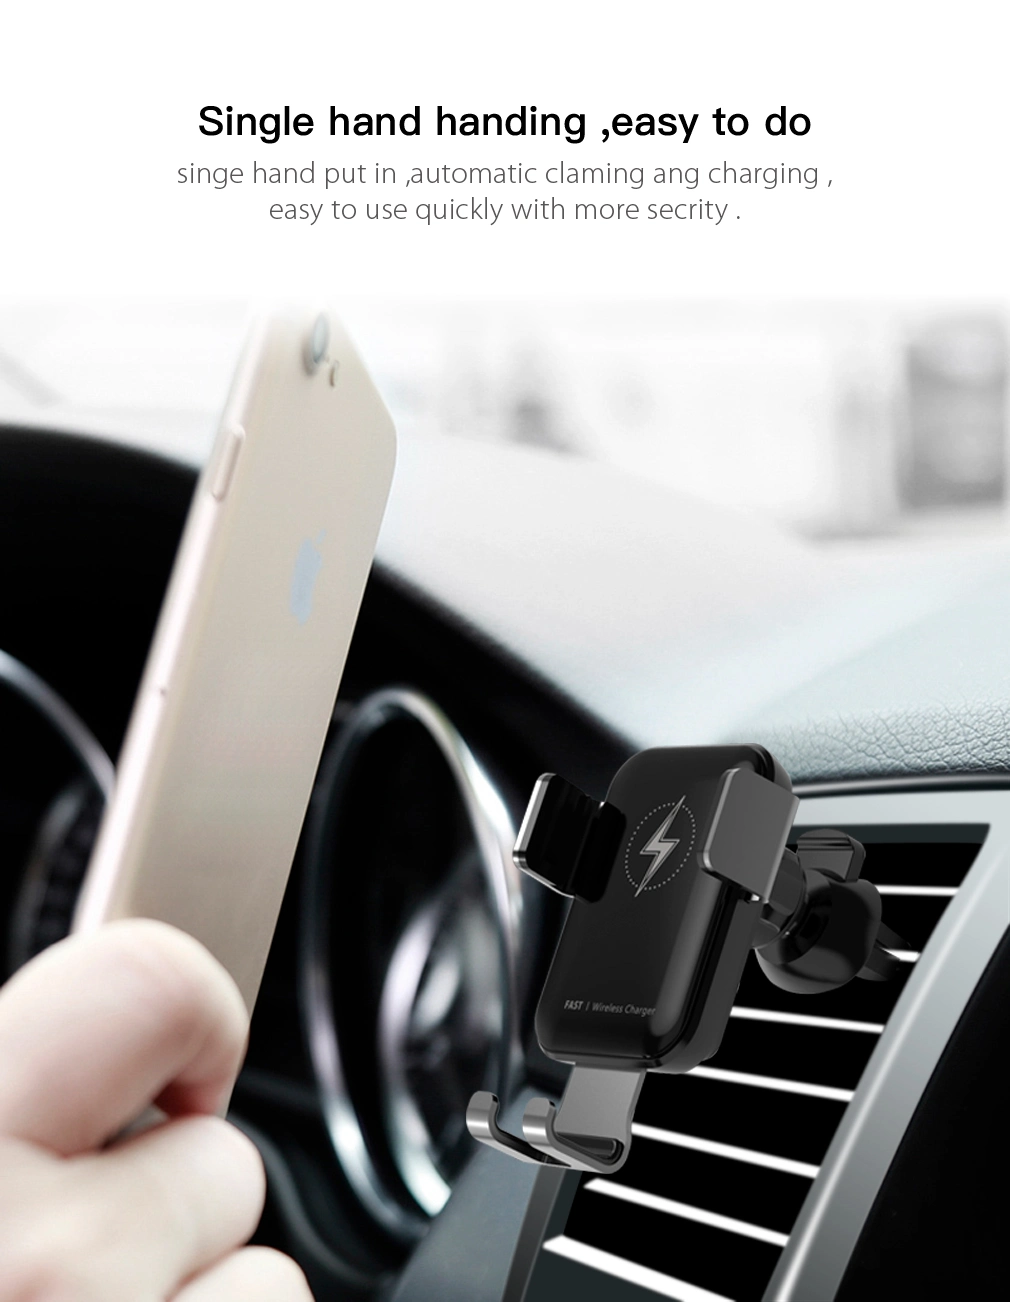 Wireless Car Charger, 10W Cell Phone Charger Auto Clamping Wireless Charger Car Phone Holder